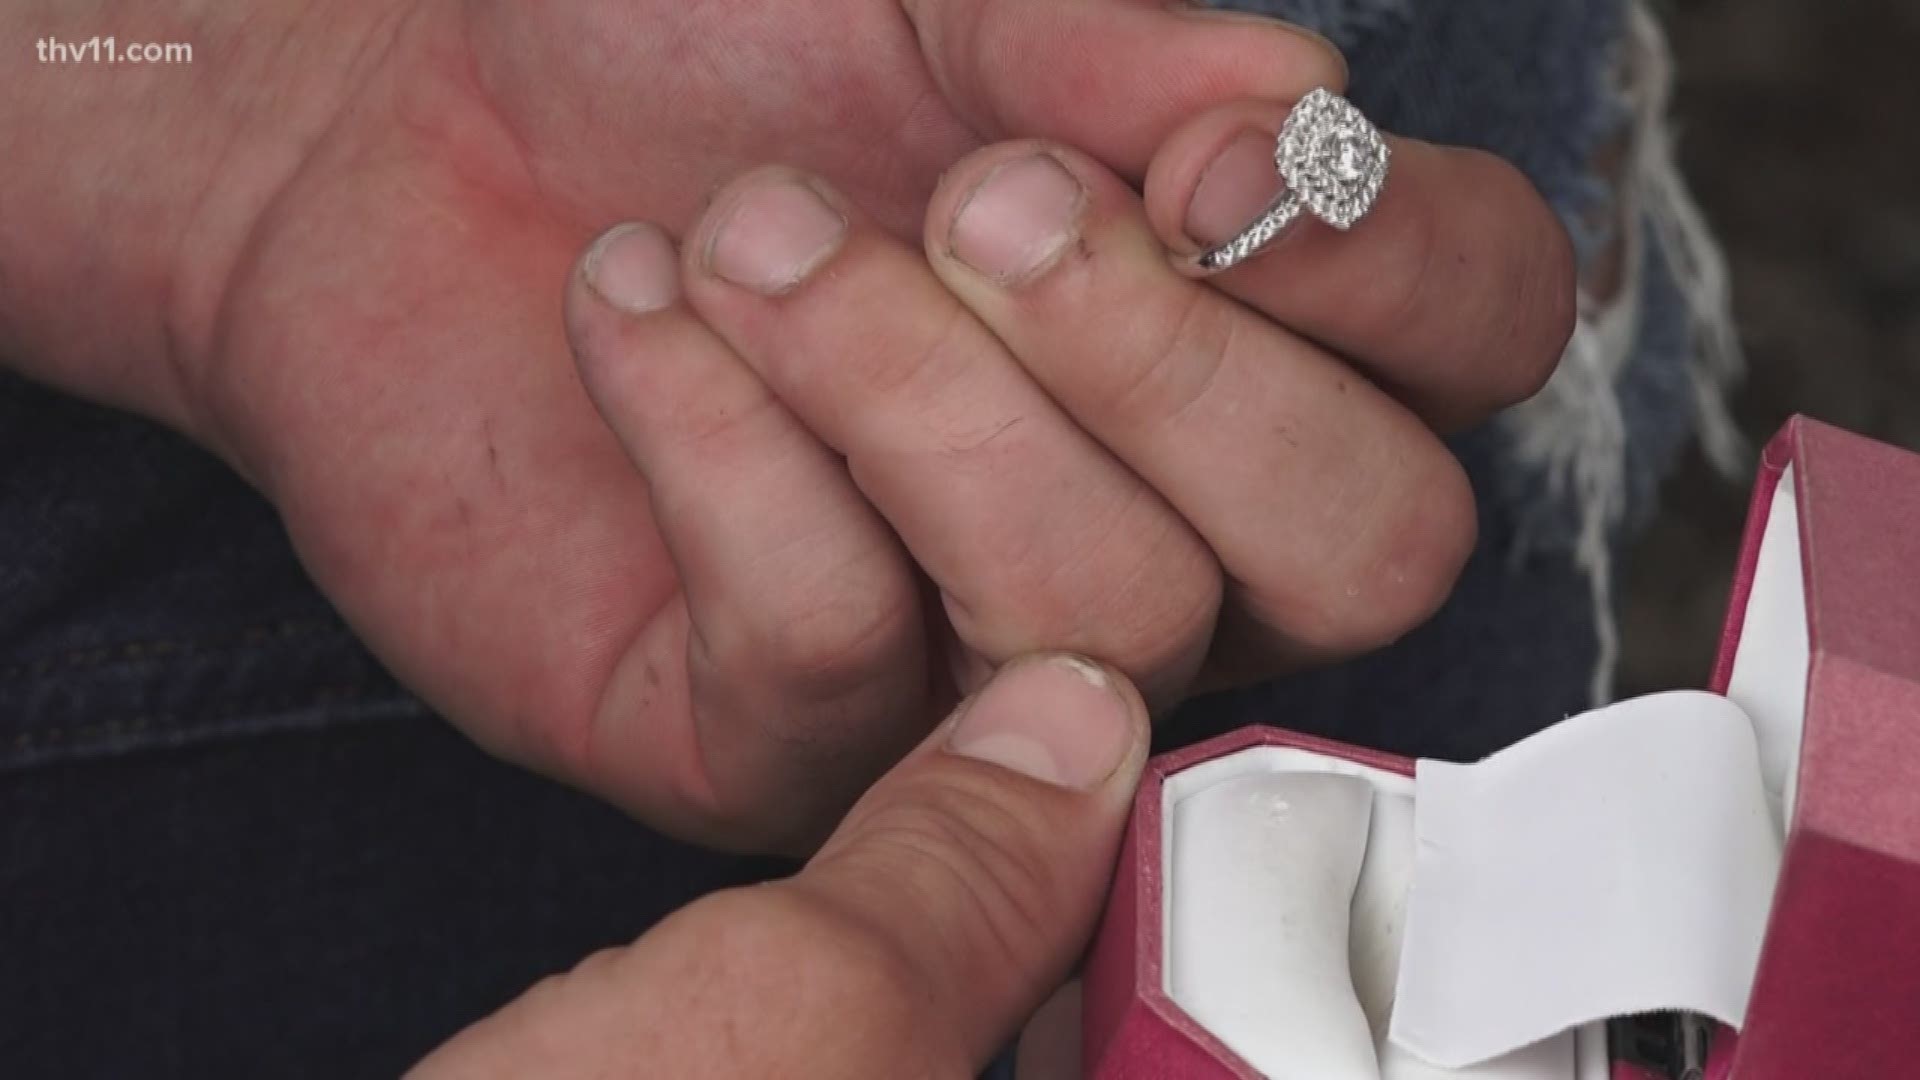 Mike Cowles decided to give away his engagement ring to a worthy couple when he wasn't able to use the ring.